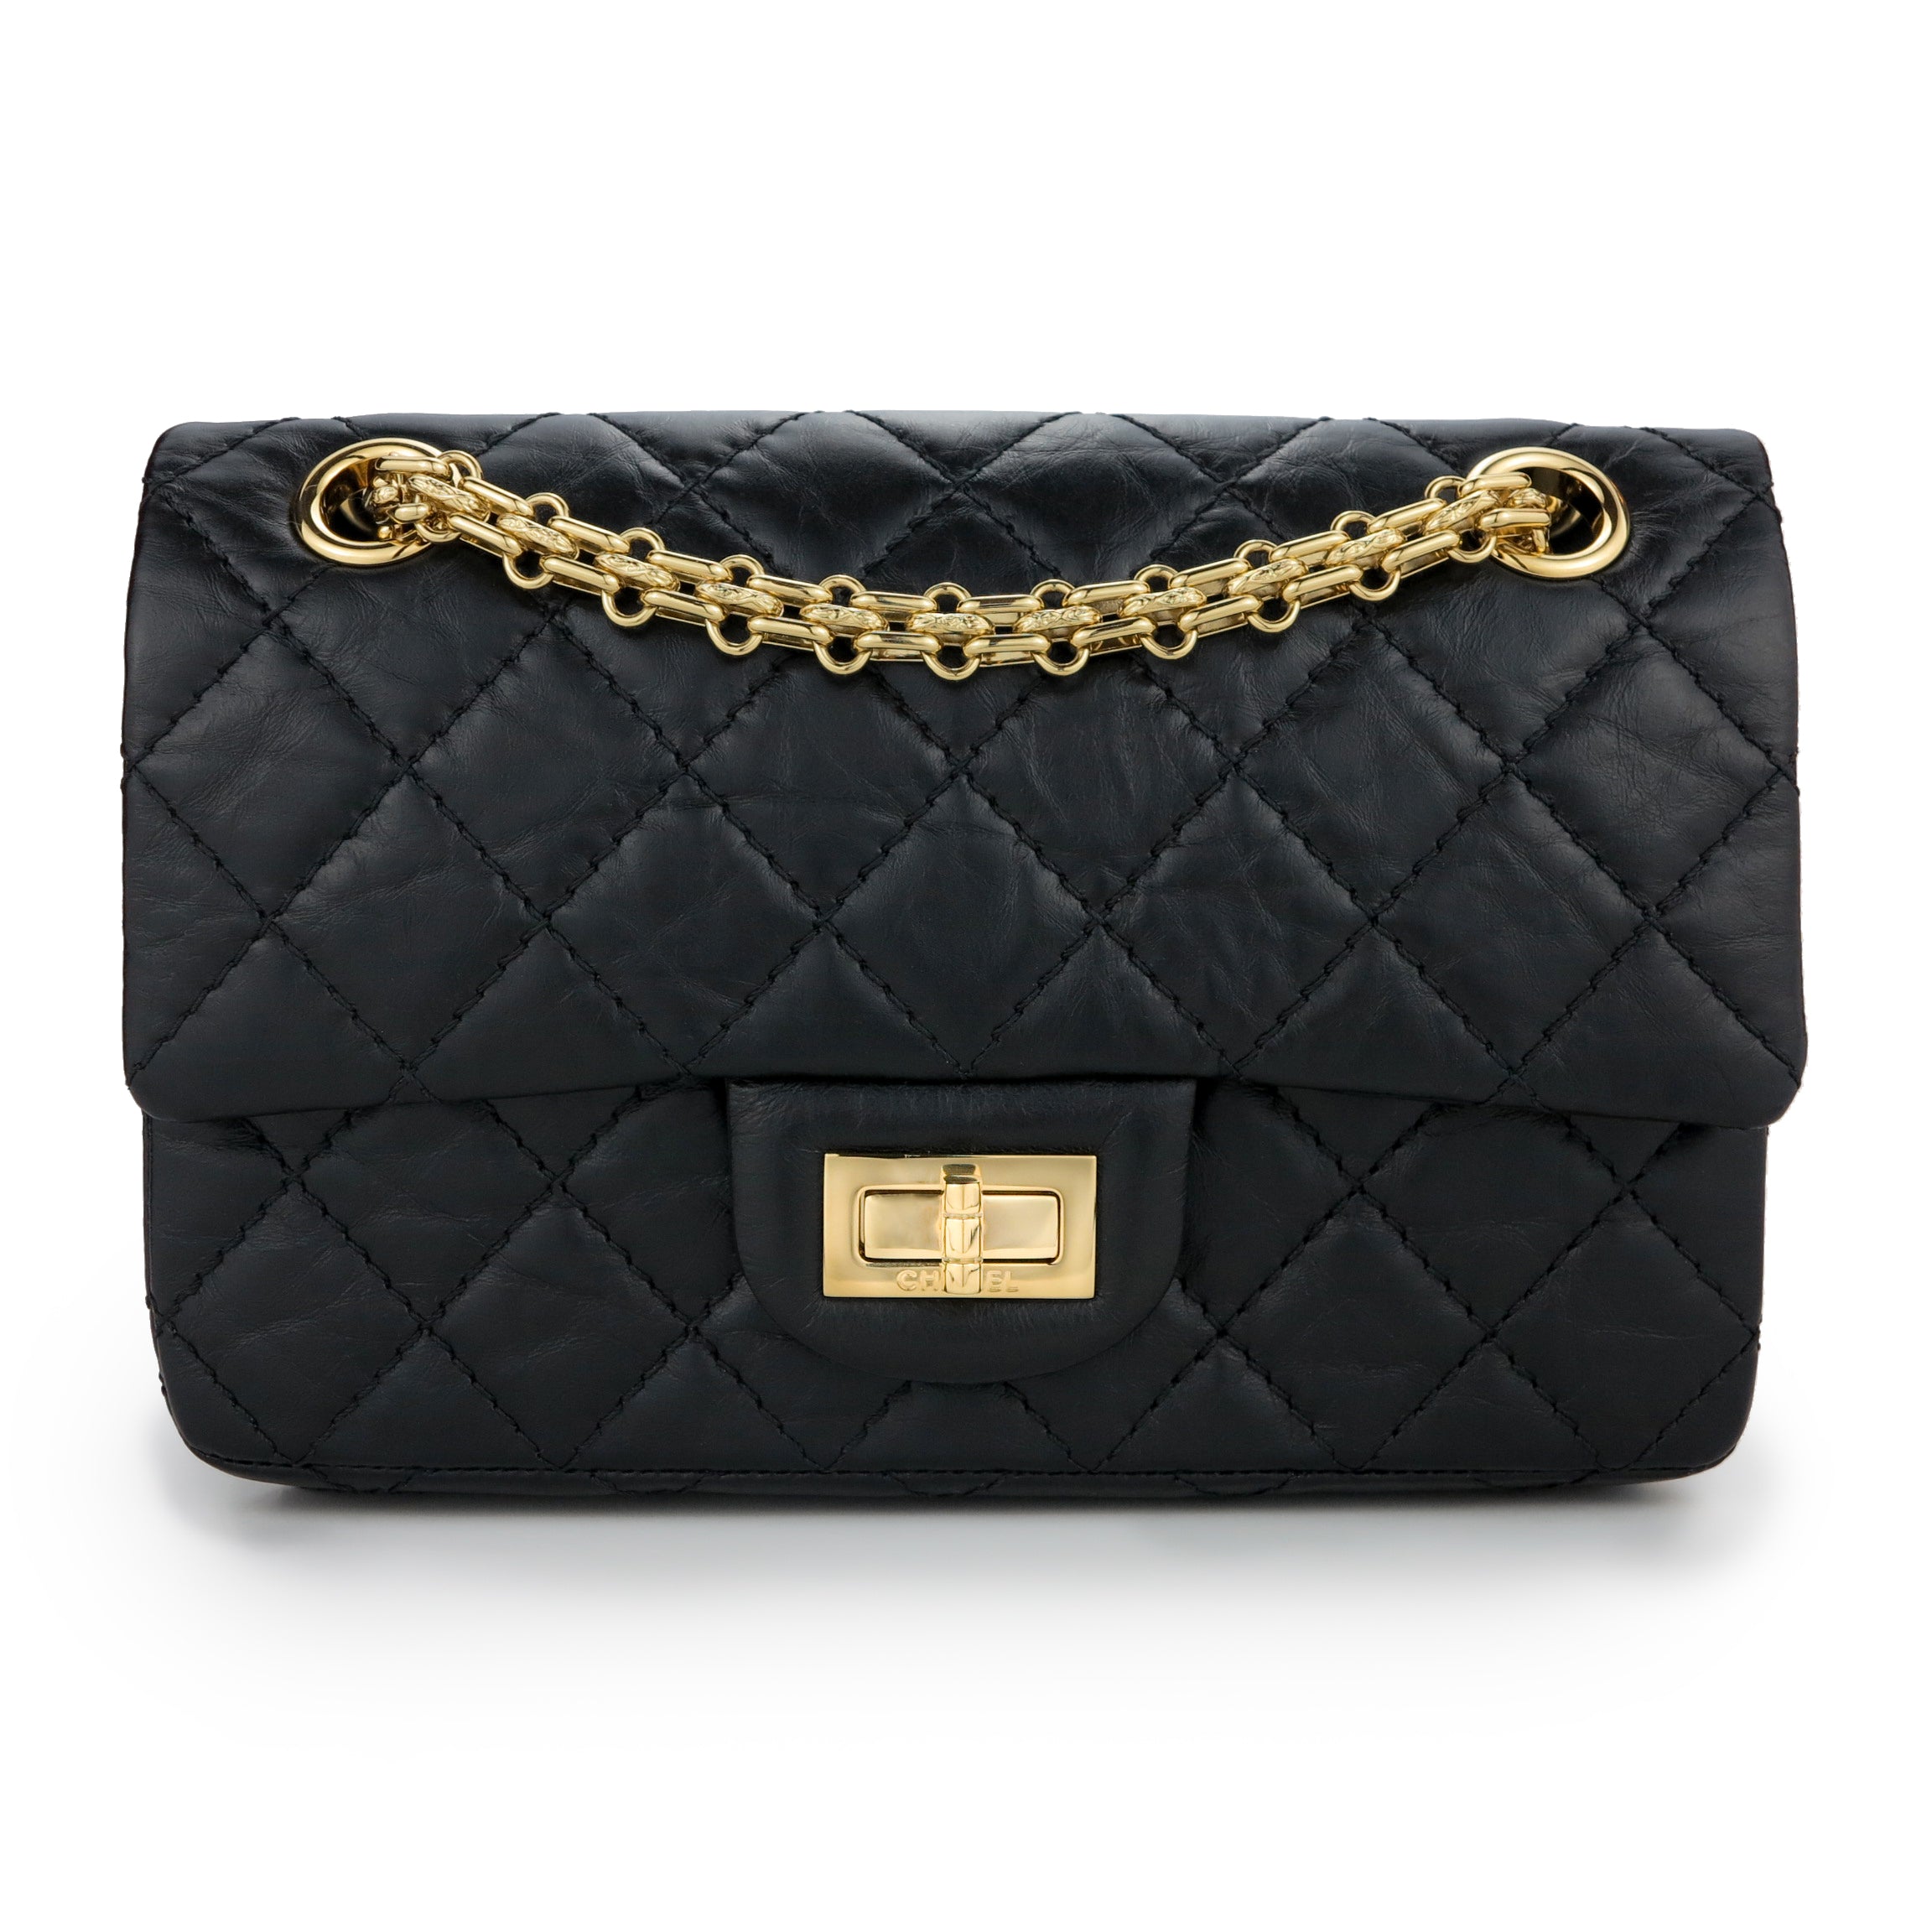 CHANEL 2.55 Reissue Flap Bag Size 227 in Black Aged Calfskin